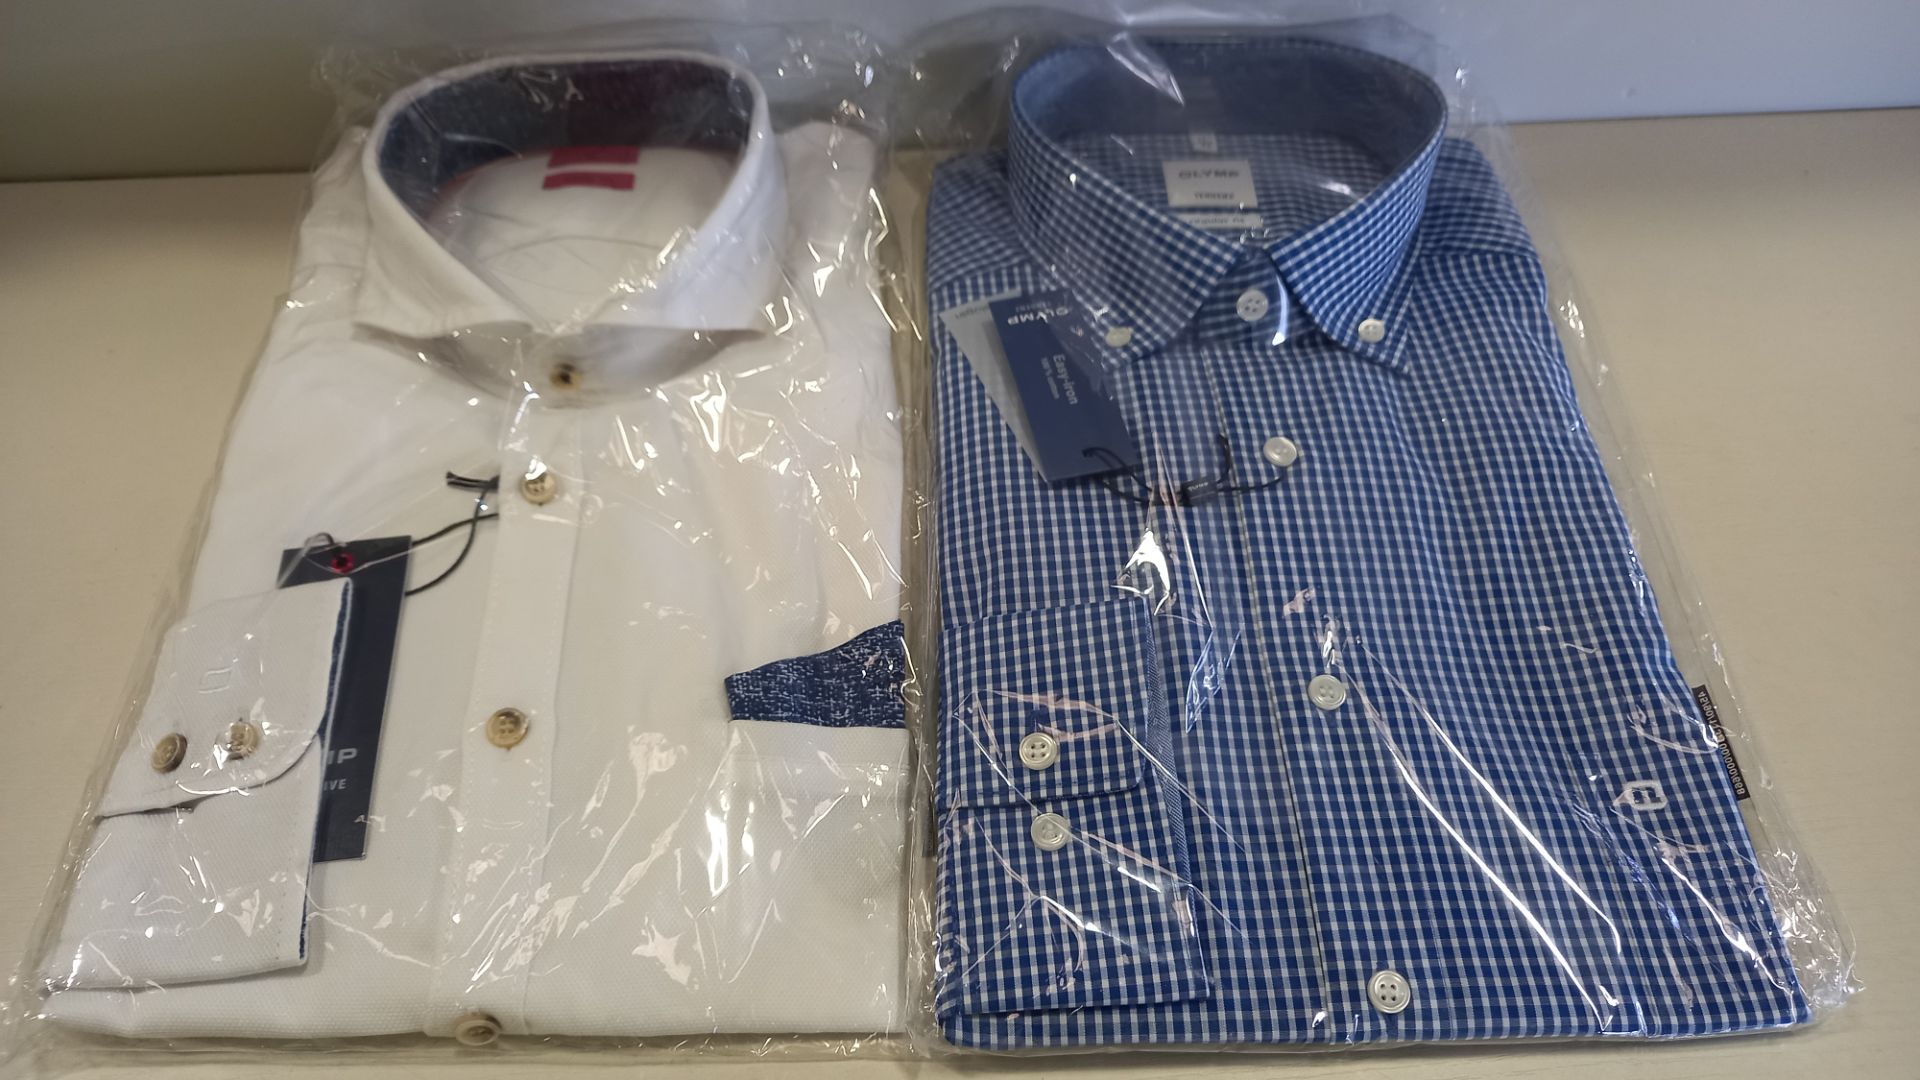 20 X BRAND NEW MENS DESIGNER BUTTON SHIRTS IN VARIOUS STYLES AND SIZES I.E OLYMP